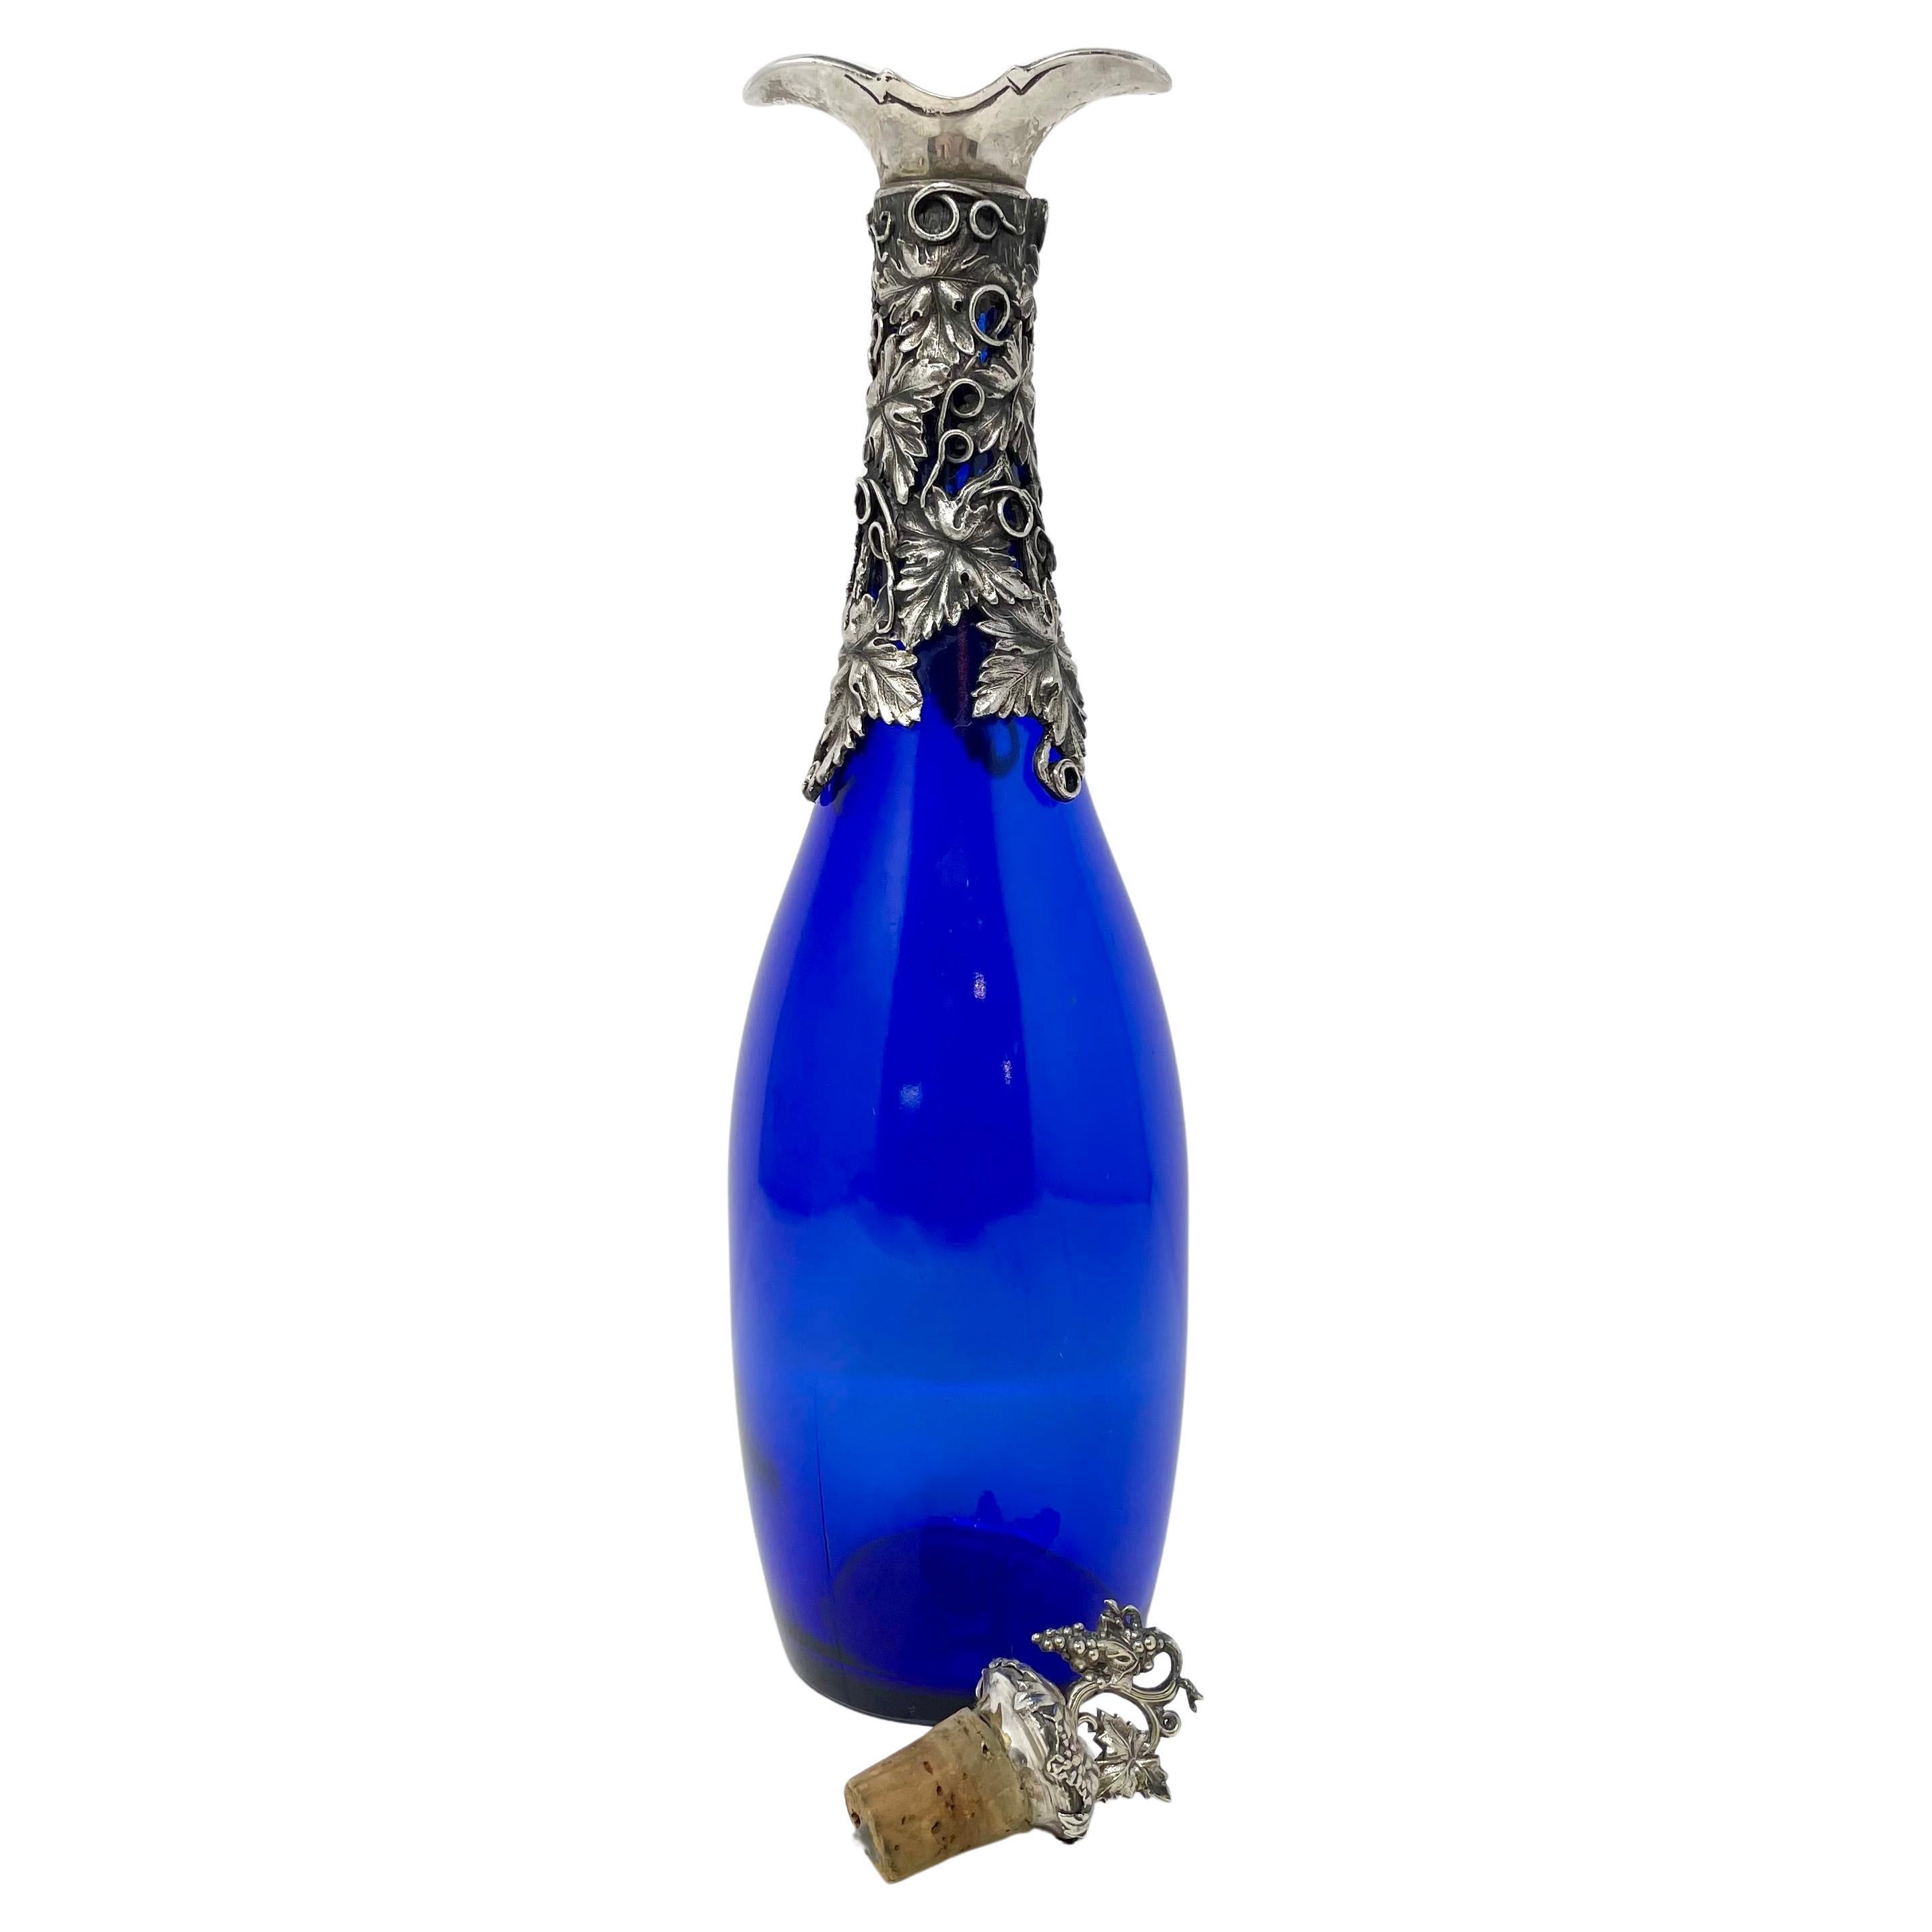 Antique Cobalt Blue Glass Liquor Bottle with Sterling Silver Top Circa 1890-1900 For Sale 2